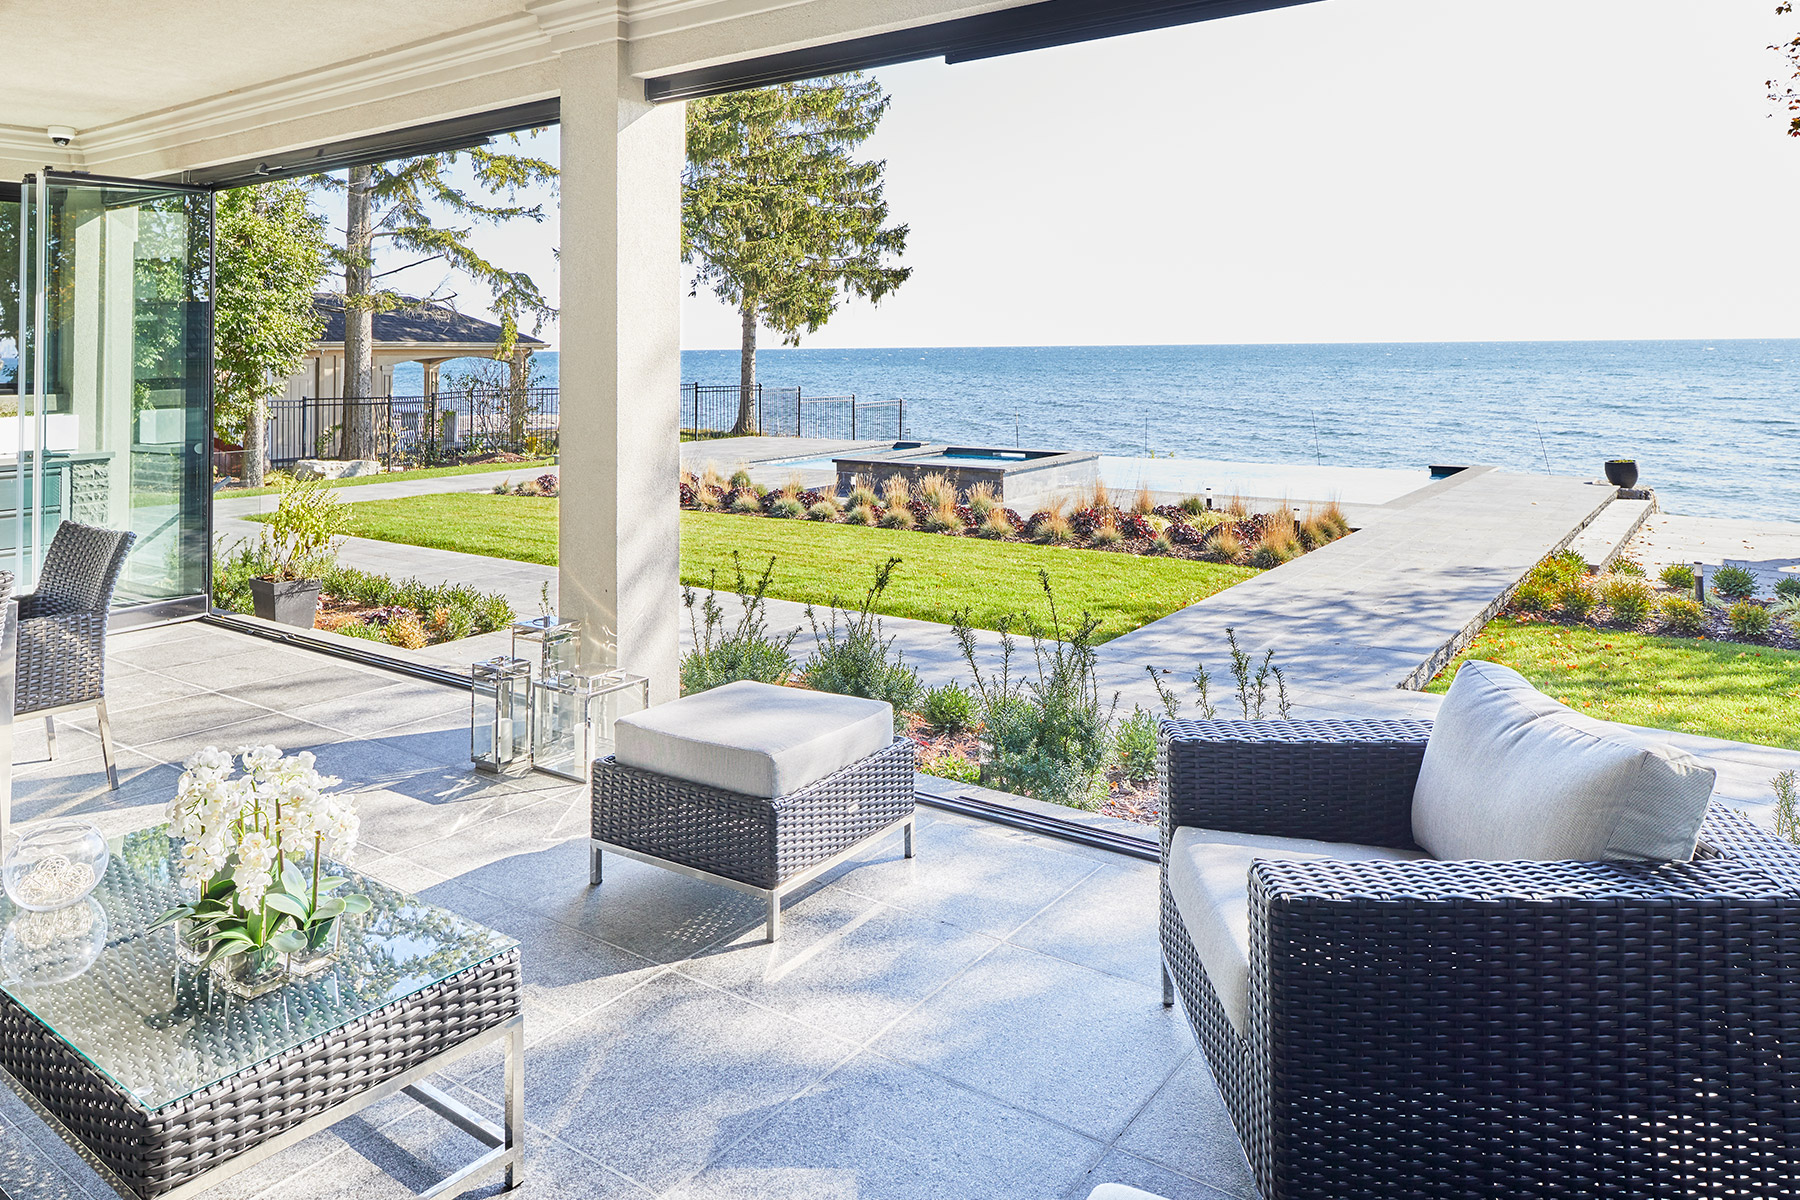 Stone covered patio with stucco columns and lakefront view.